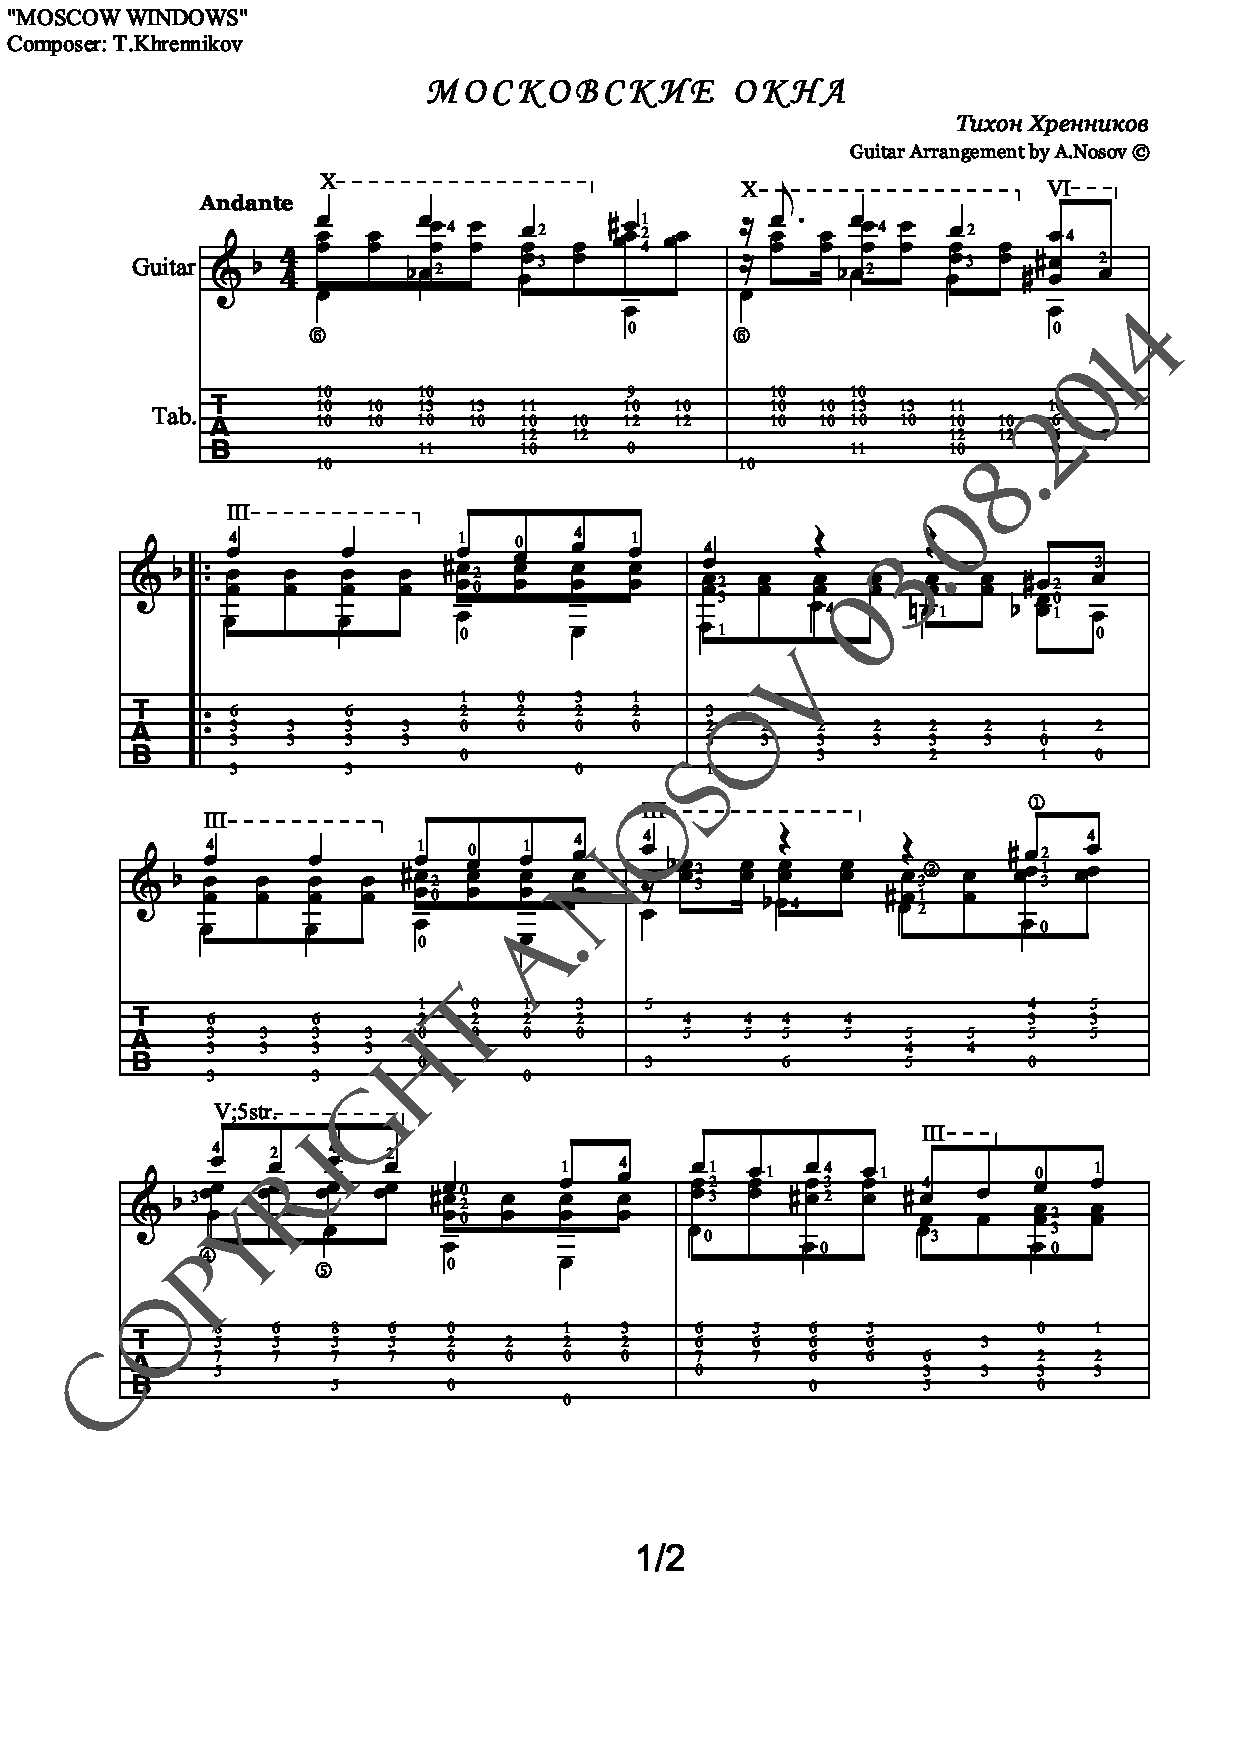 Buy Moscow Windows (Sheet music and tabs for guitar solo) and download